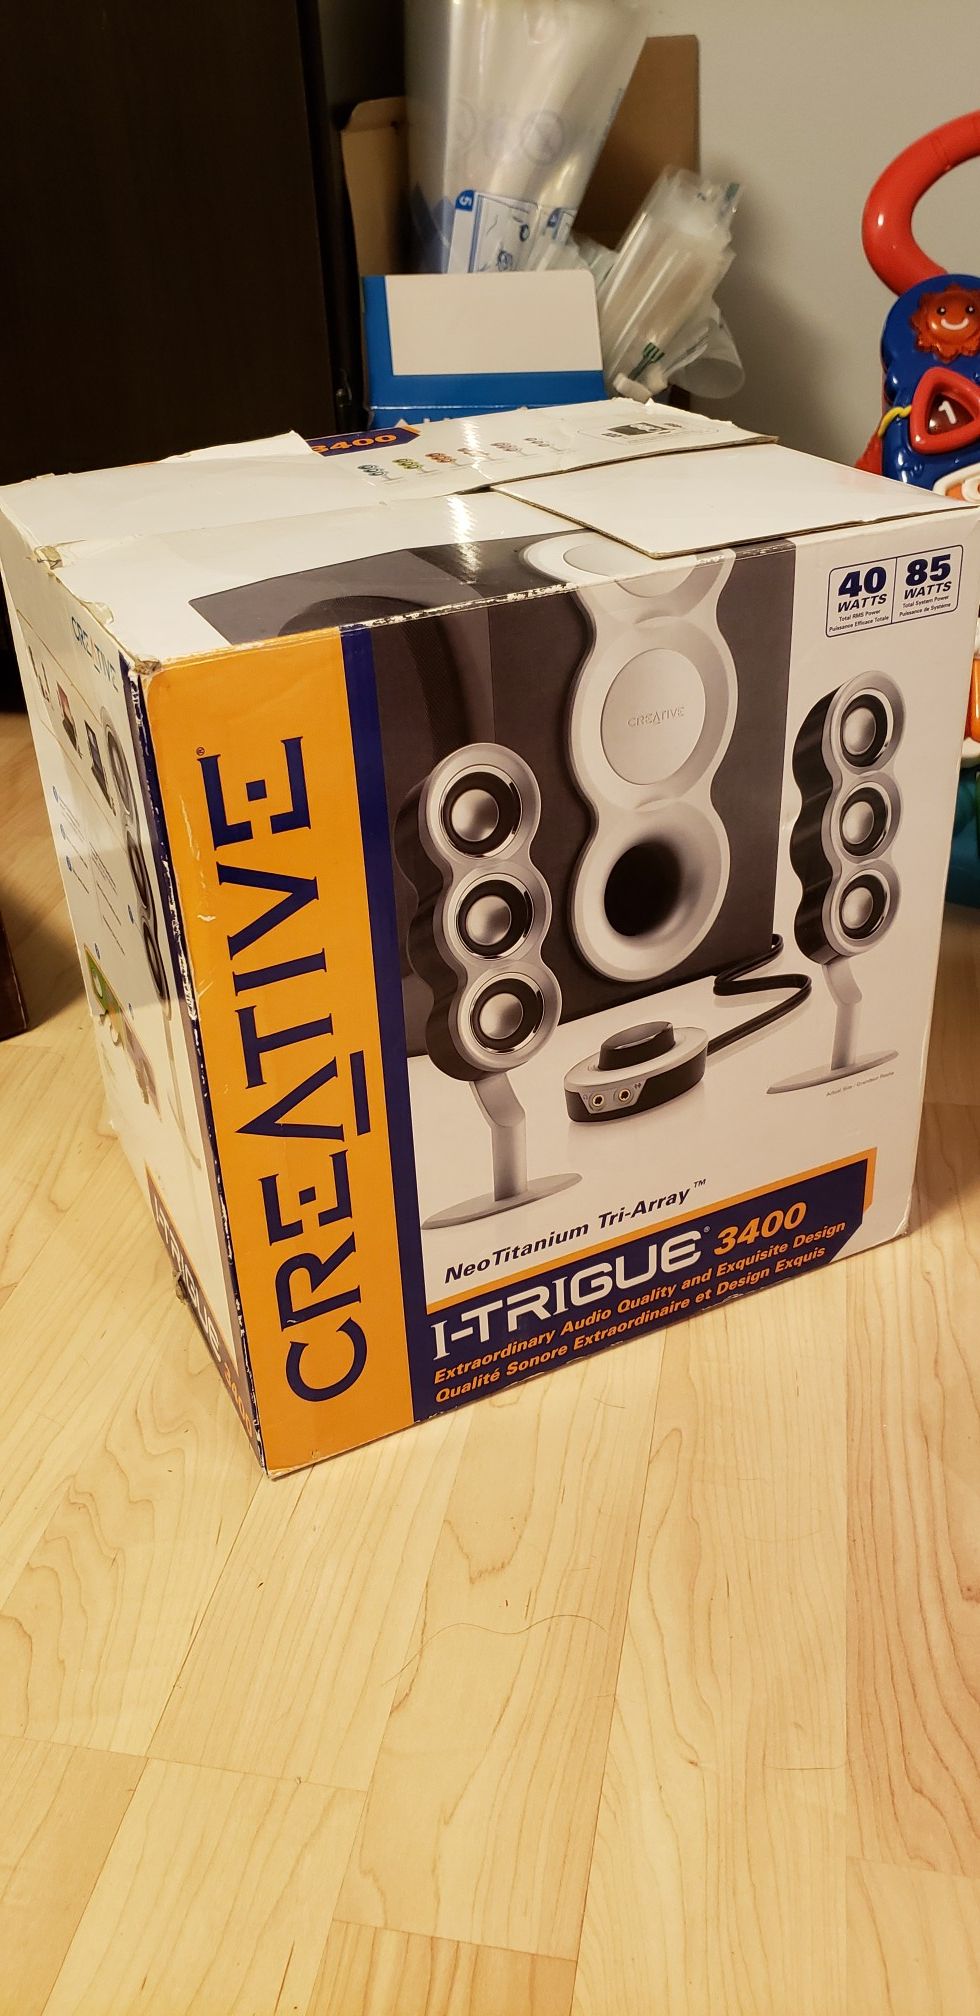 Creative i-trigue 3400 computer speakers